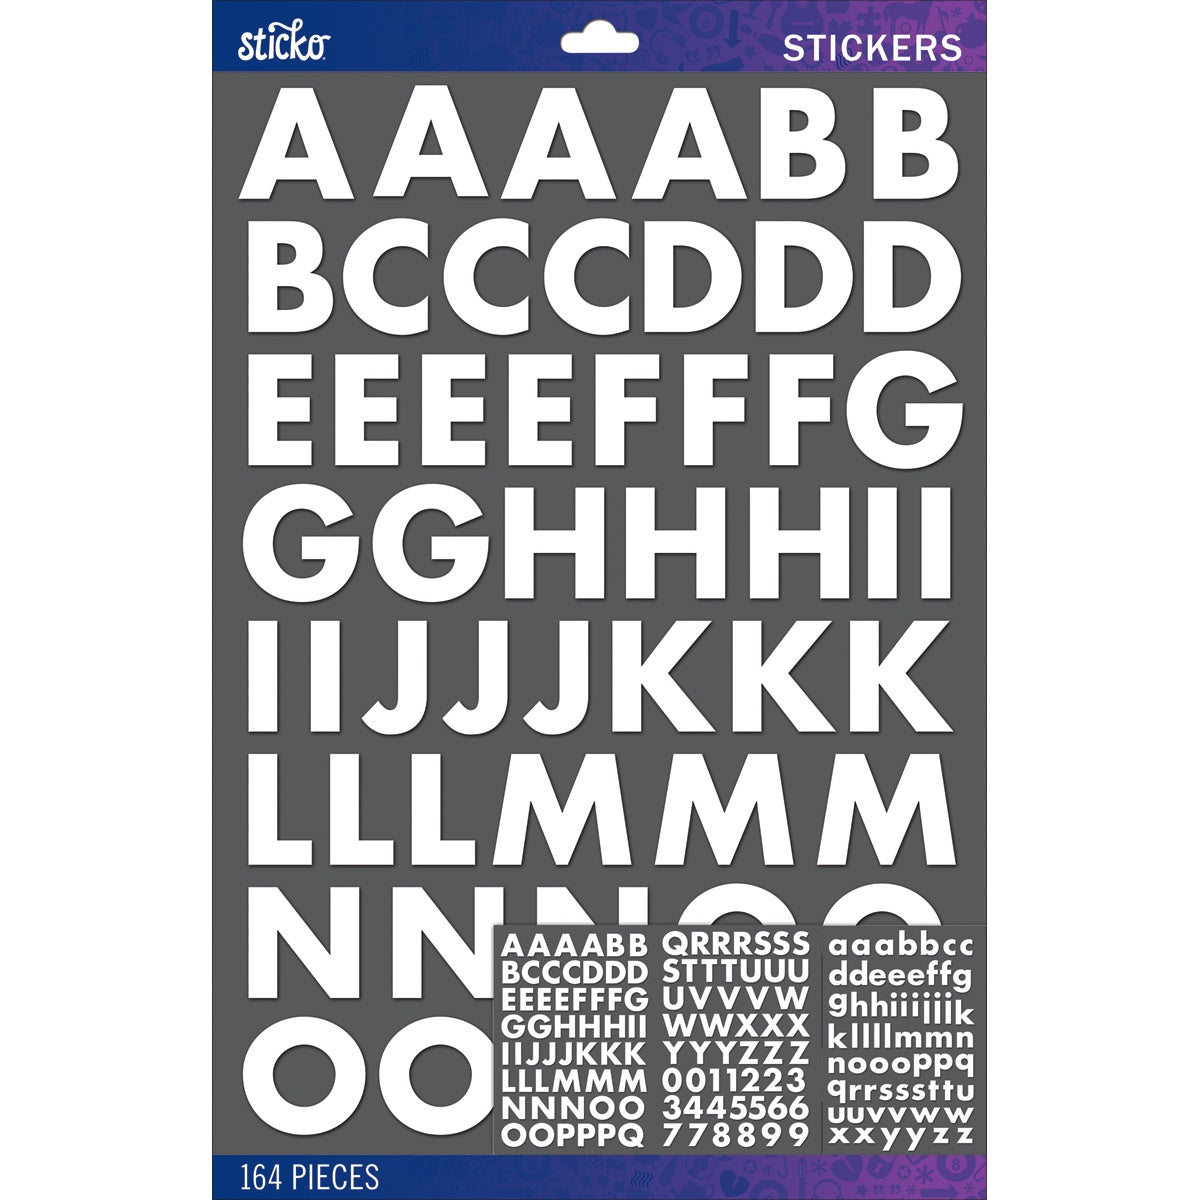 Multipack of 6 - Sticko Alphabet Stickers-White Futura Bold Large